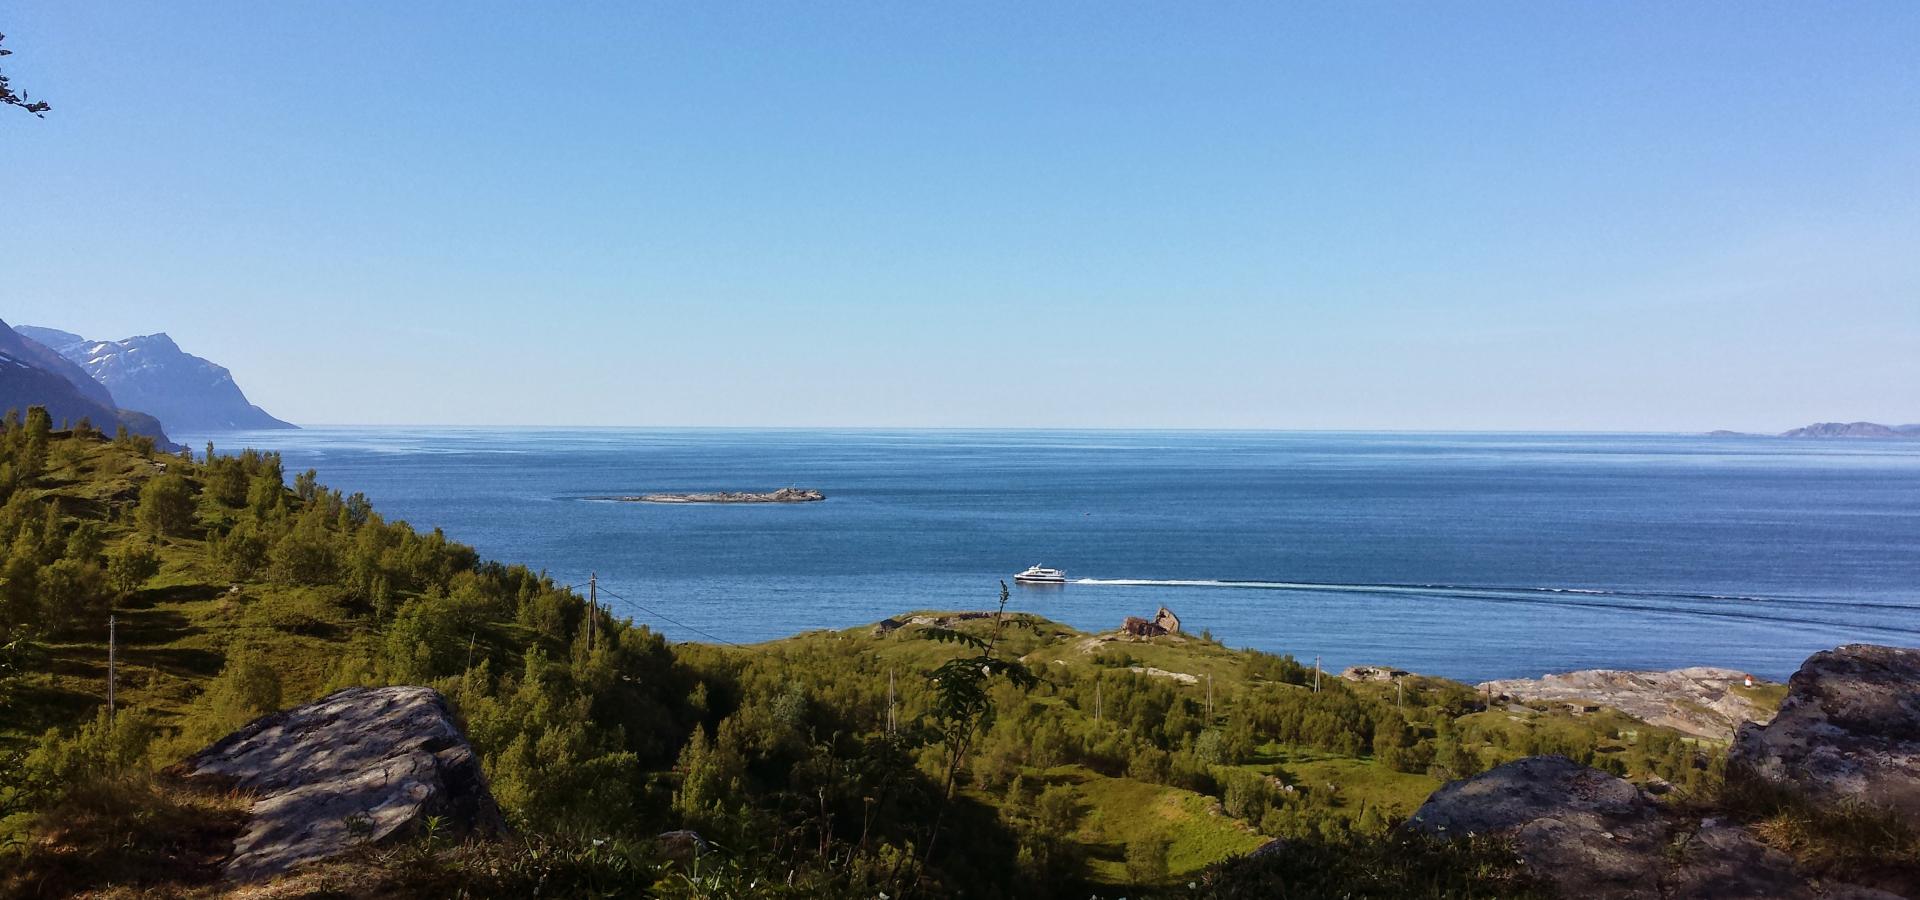 View of the sea and horizon on a sunny day, in front a nature area